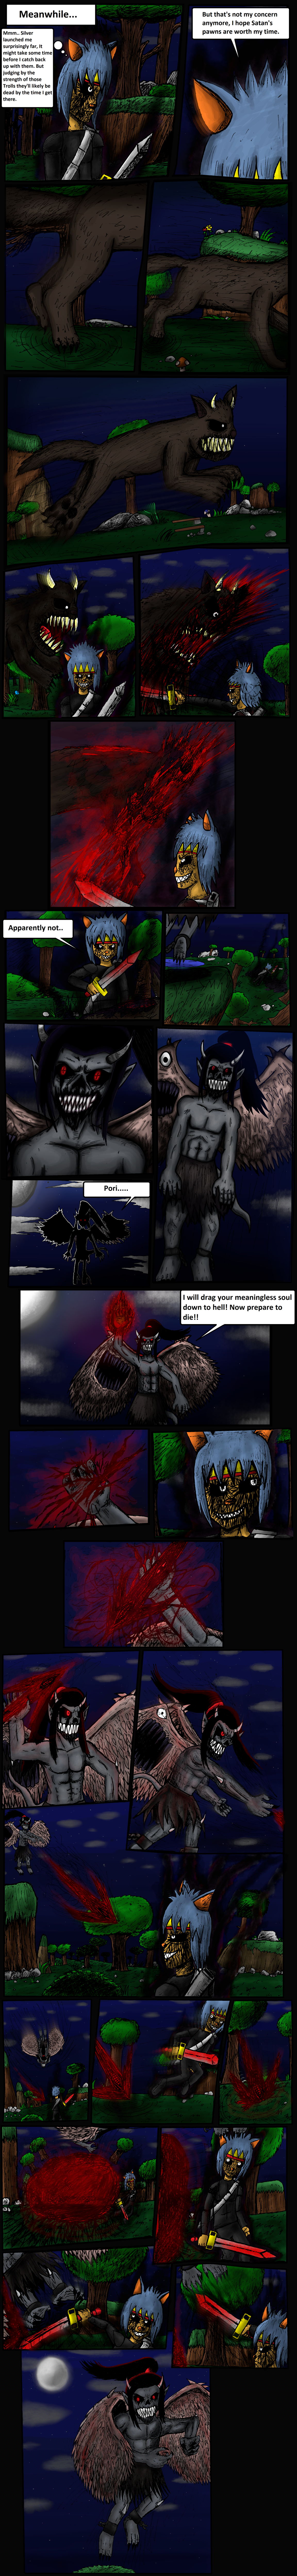 ch25.5/pg25.png. If you're seeing this, enable images. Or, perhaps we have a website issue. Try refreshing, if unsuccessful email c@commodorian.org with a detailed description of how you got here.